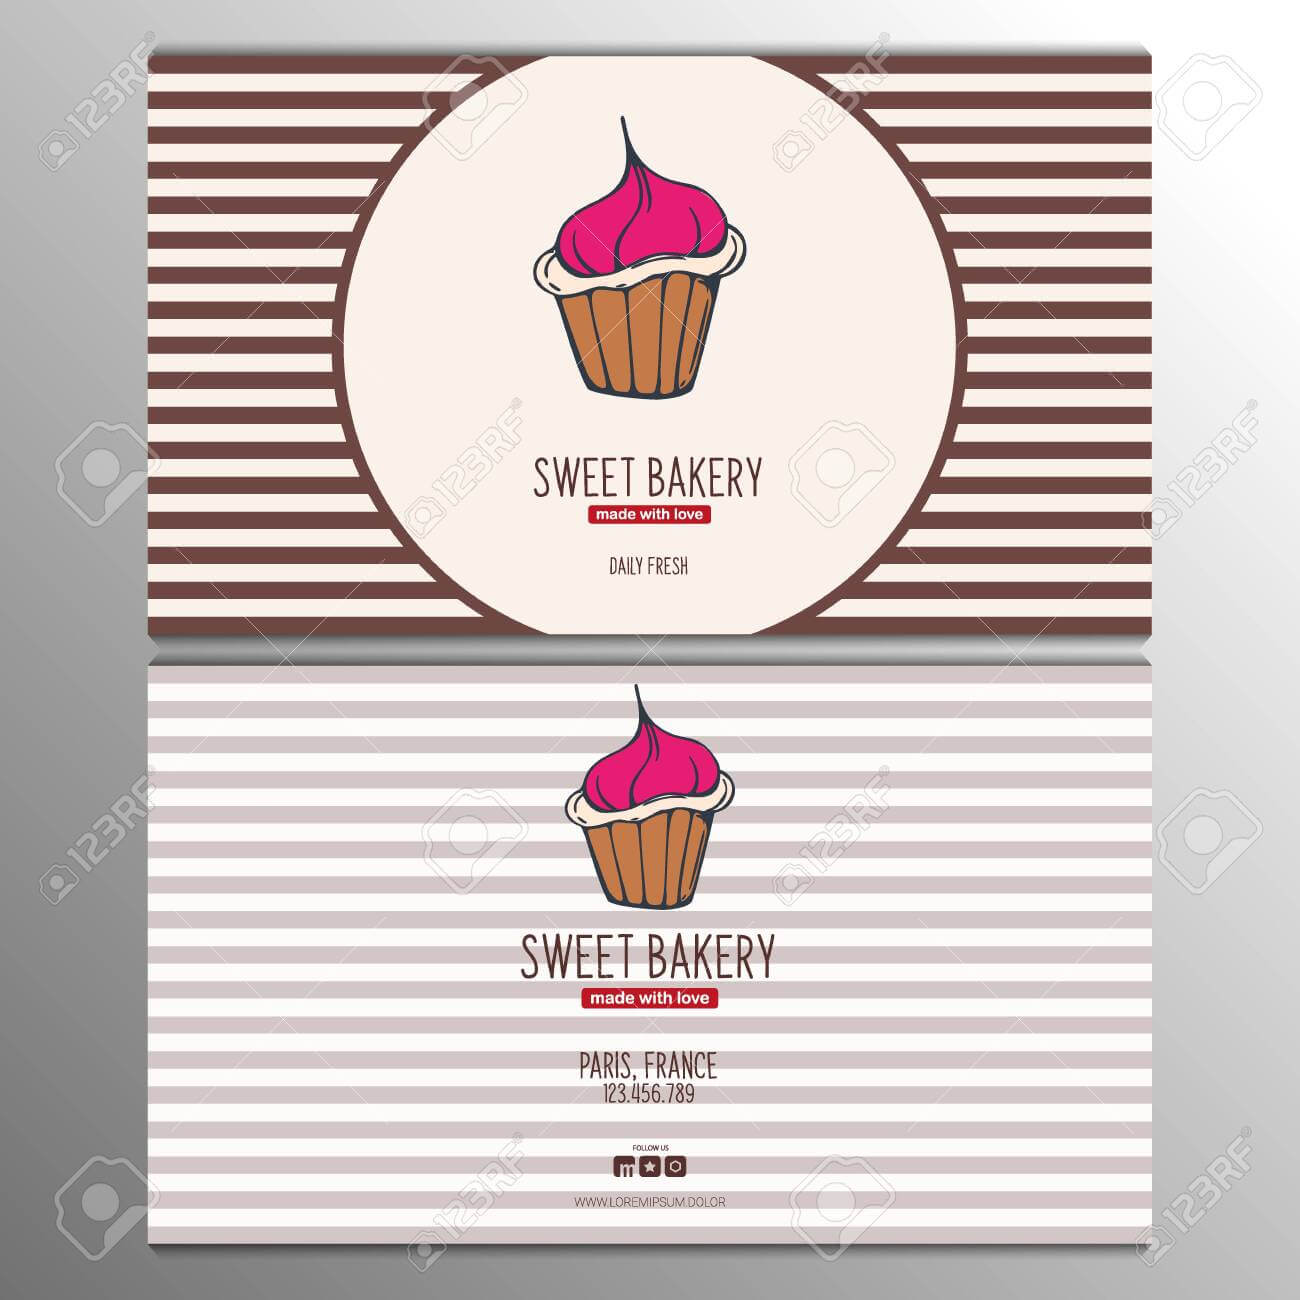 Cupcake Or Cake Business Card Template For Bakery Or Pastry. For Cake Business Cards Templates Free